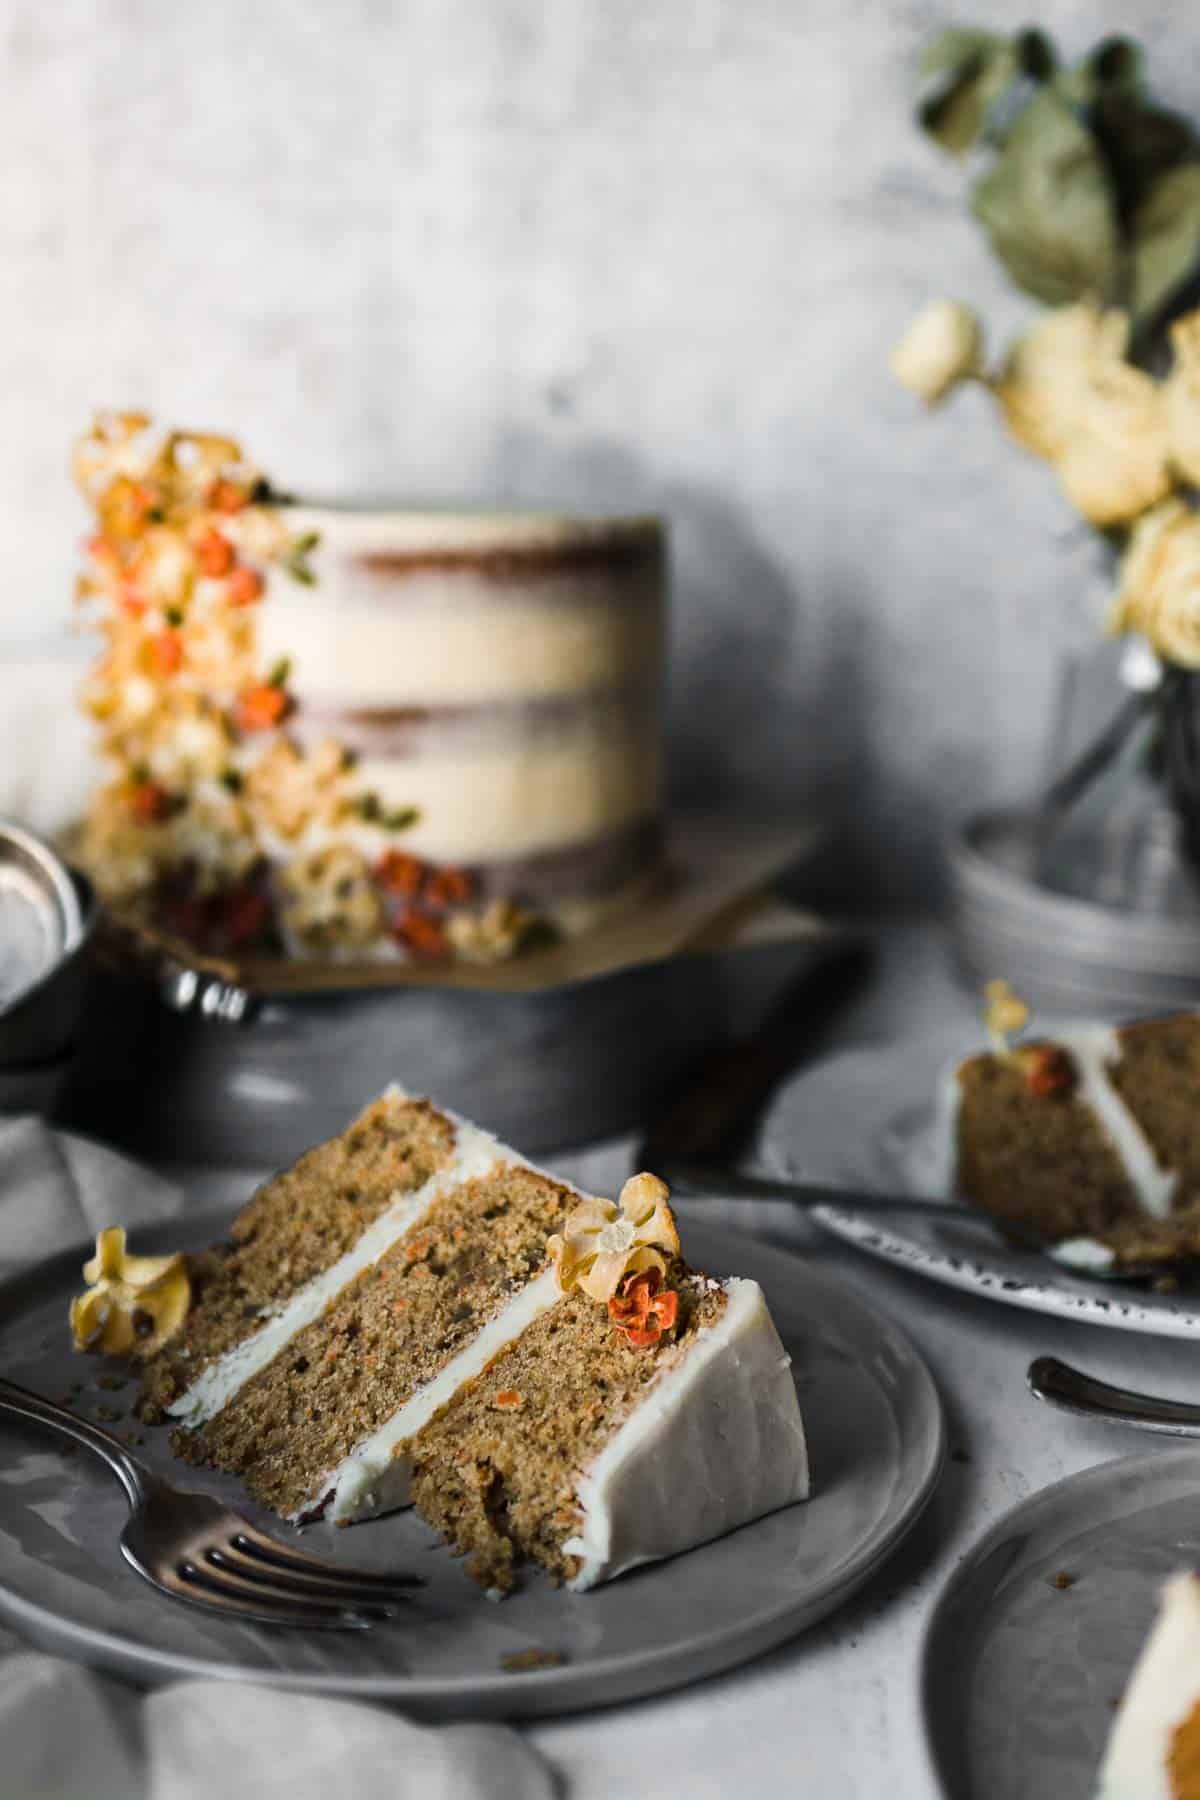 A slice of carrot spice cake on a plate with a fork and one missing bite. The whole cake is in the background and is surrounded by other plates and slices